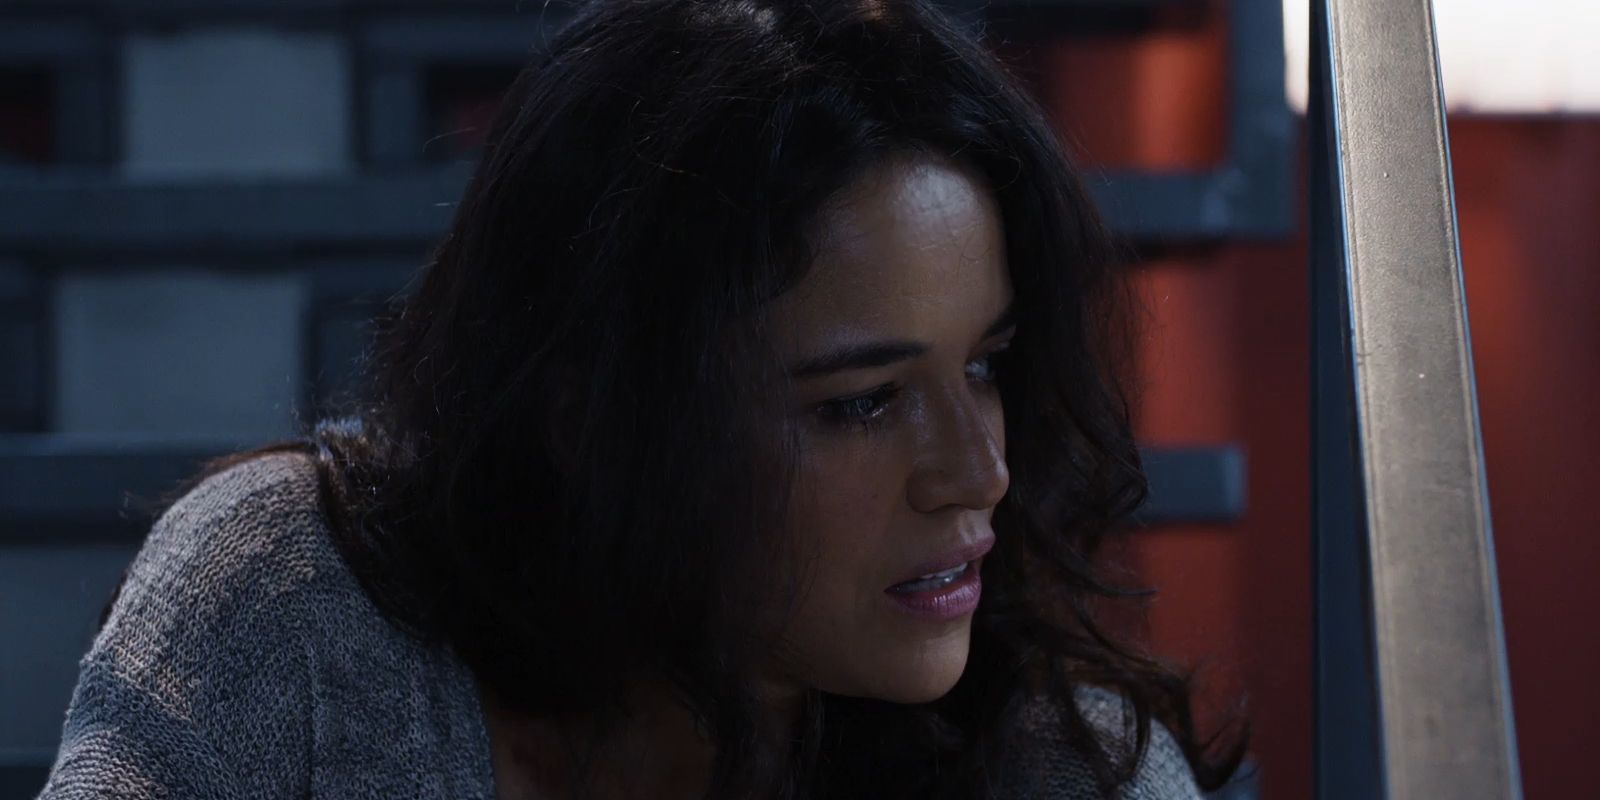 Michelle Rodriguez in Fate of the Furious